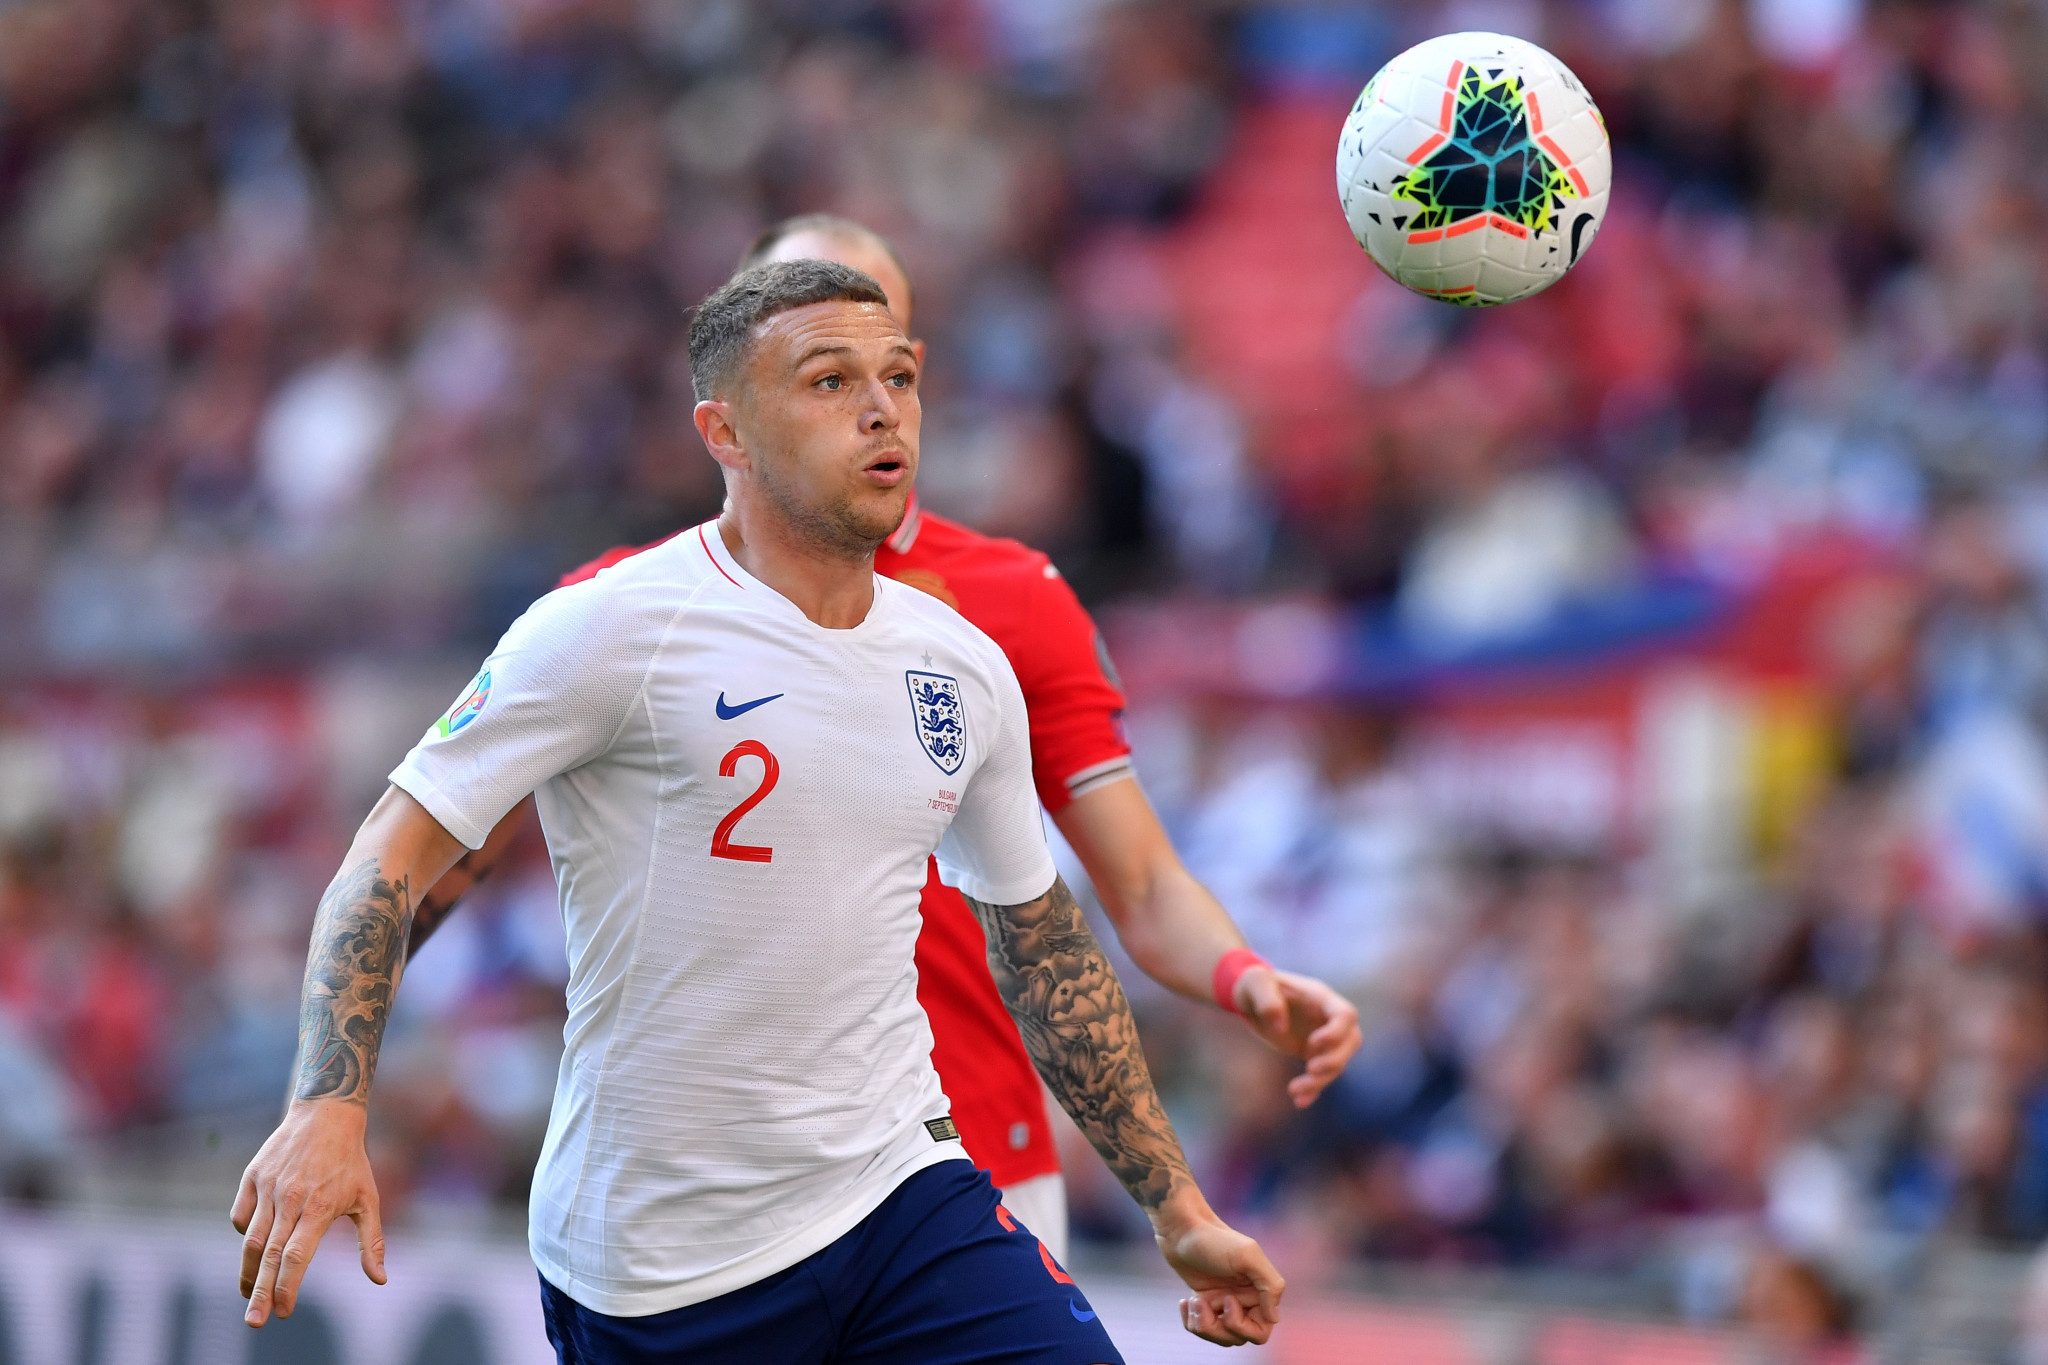 England defender Trippier given 10-week ban for breaching FA betting rules